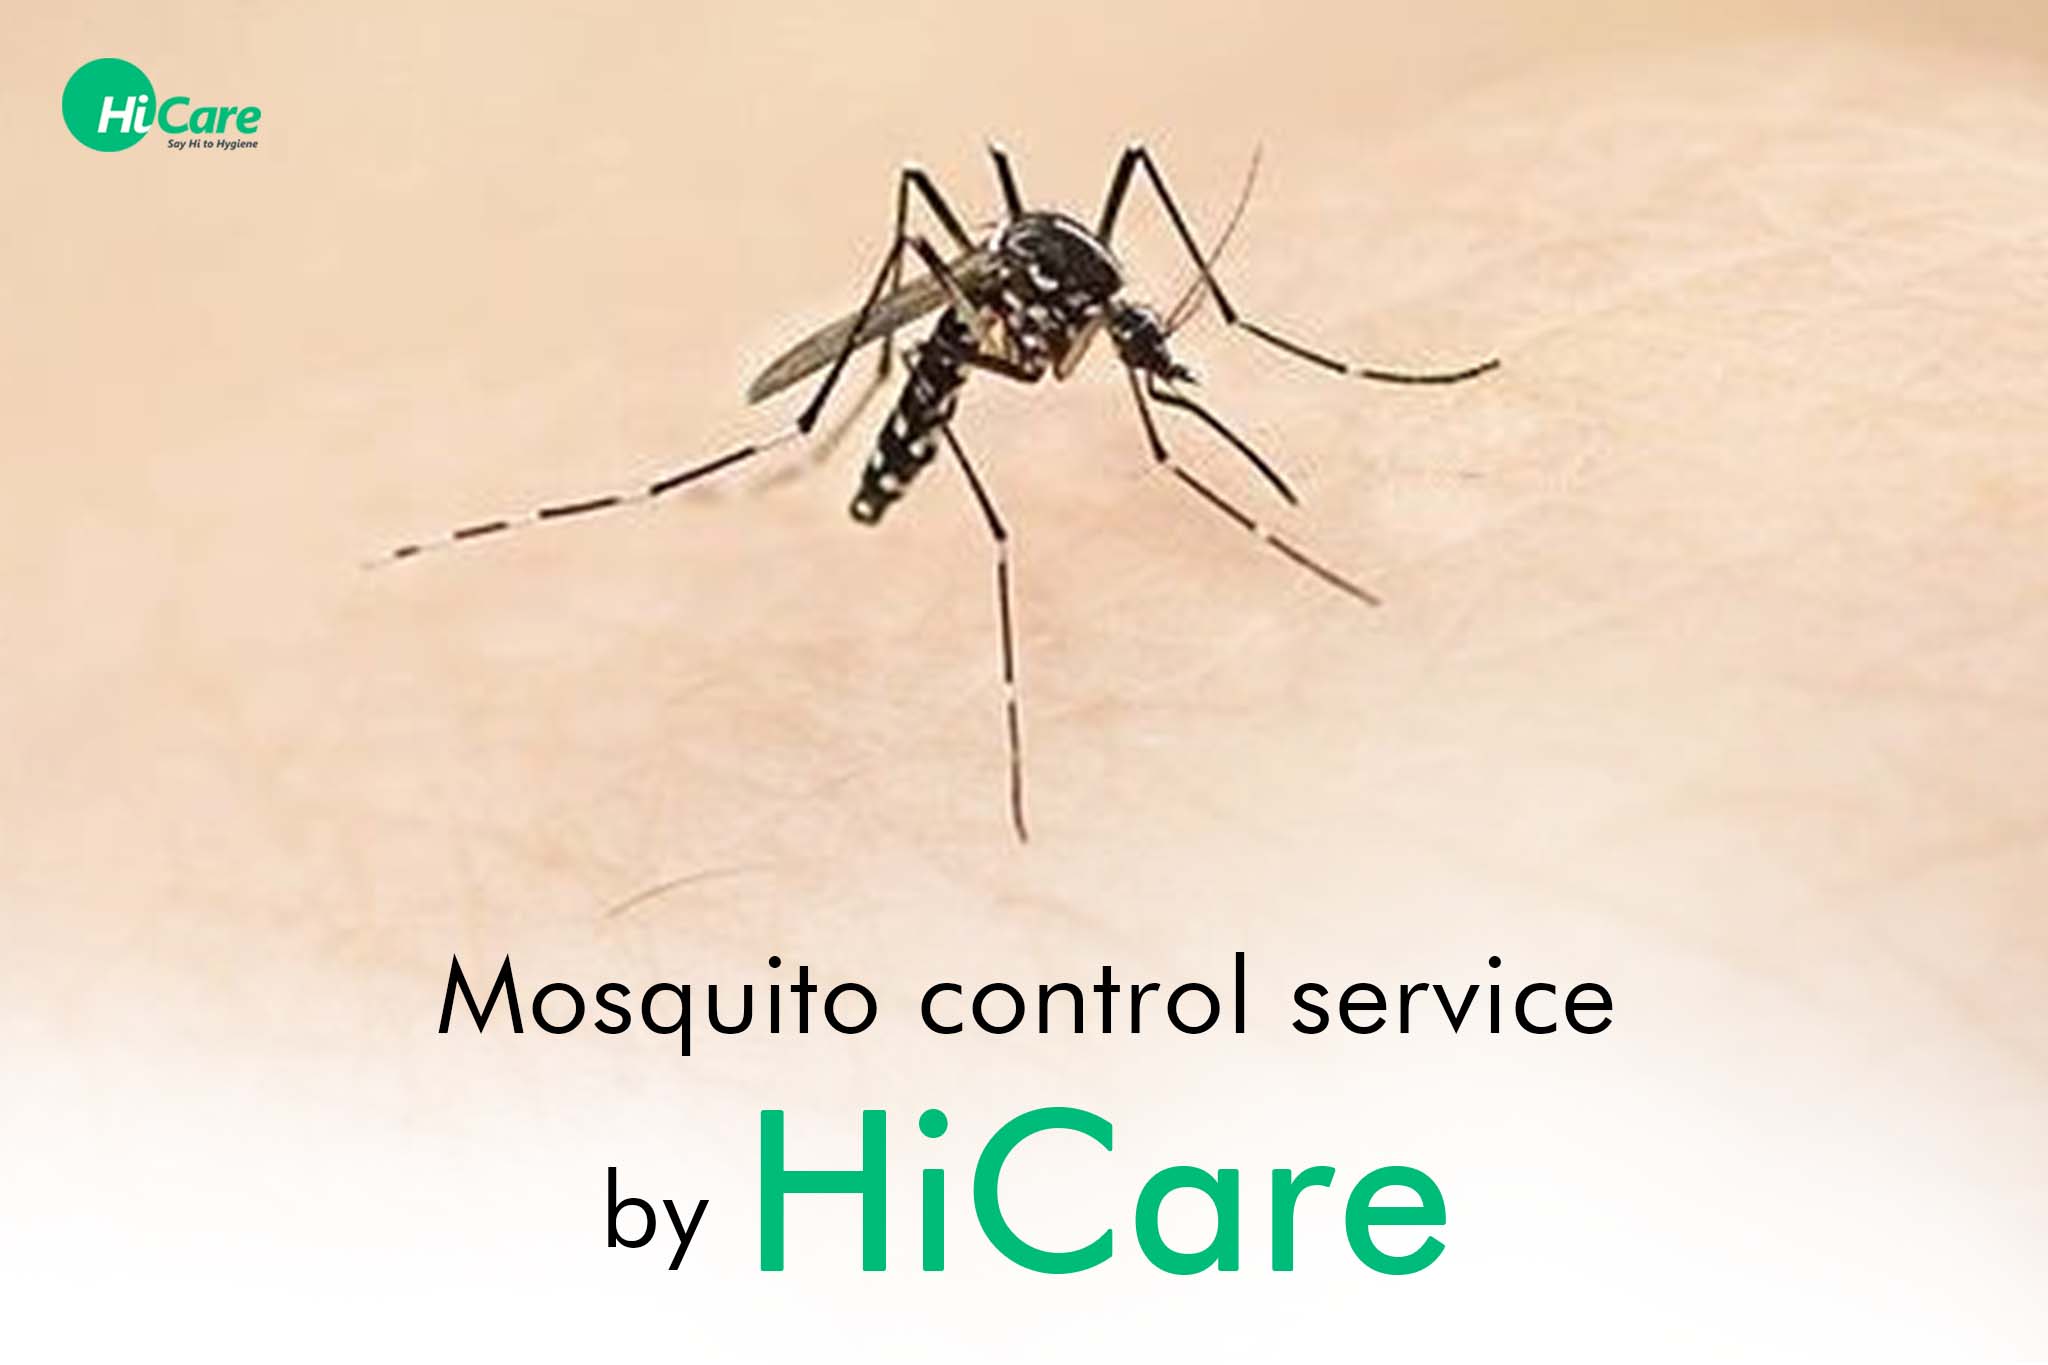 3X Mosquito Control Service by HiCare